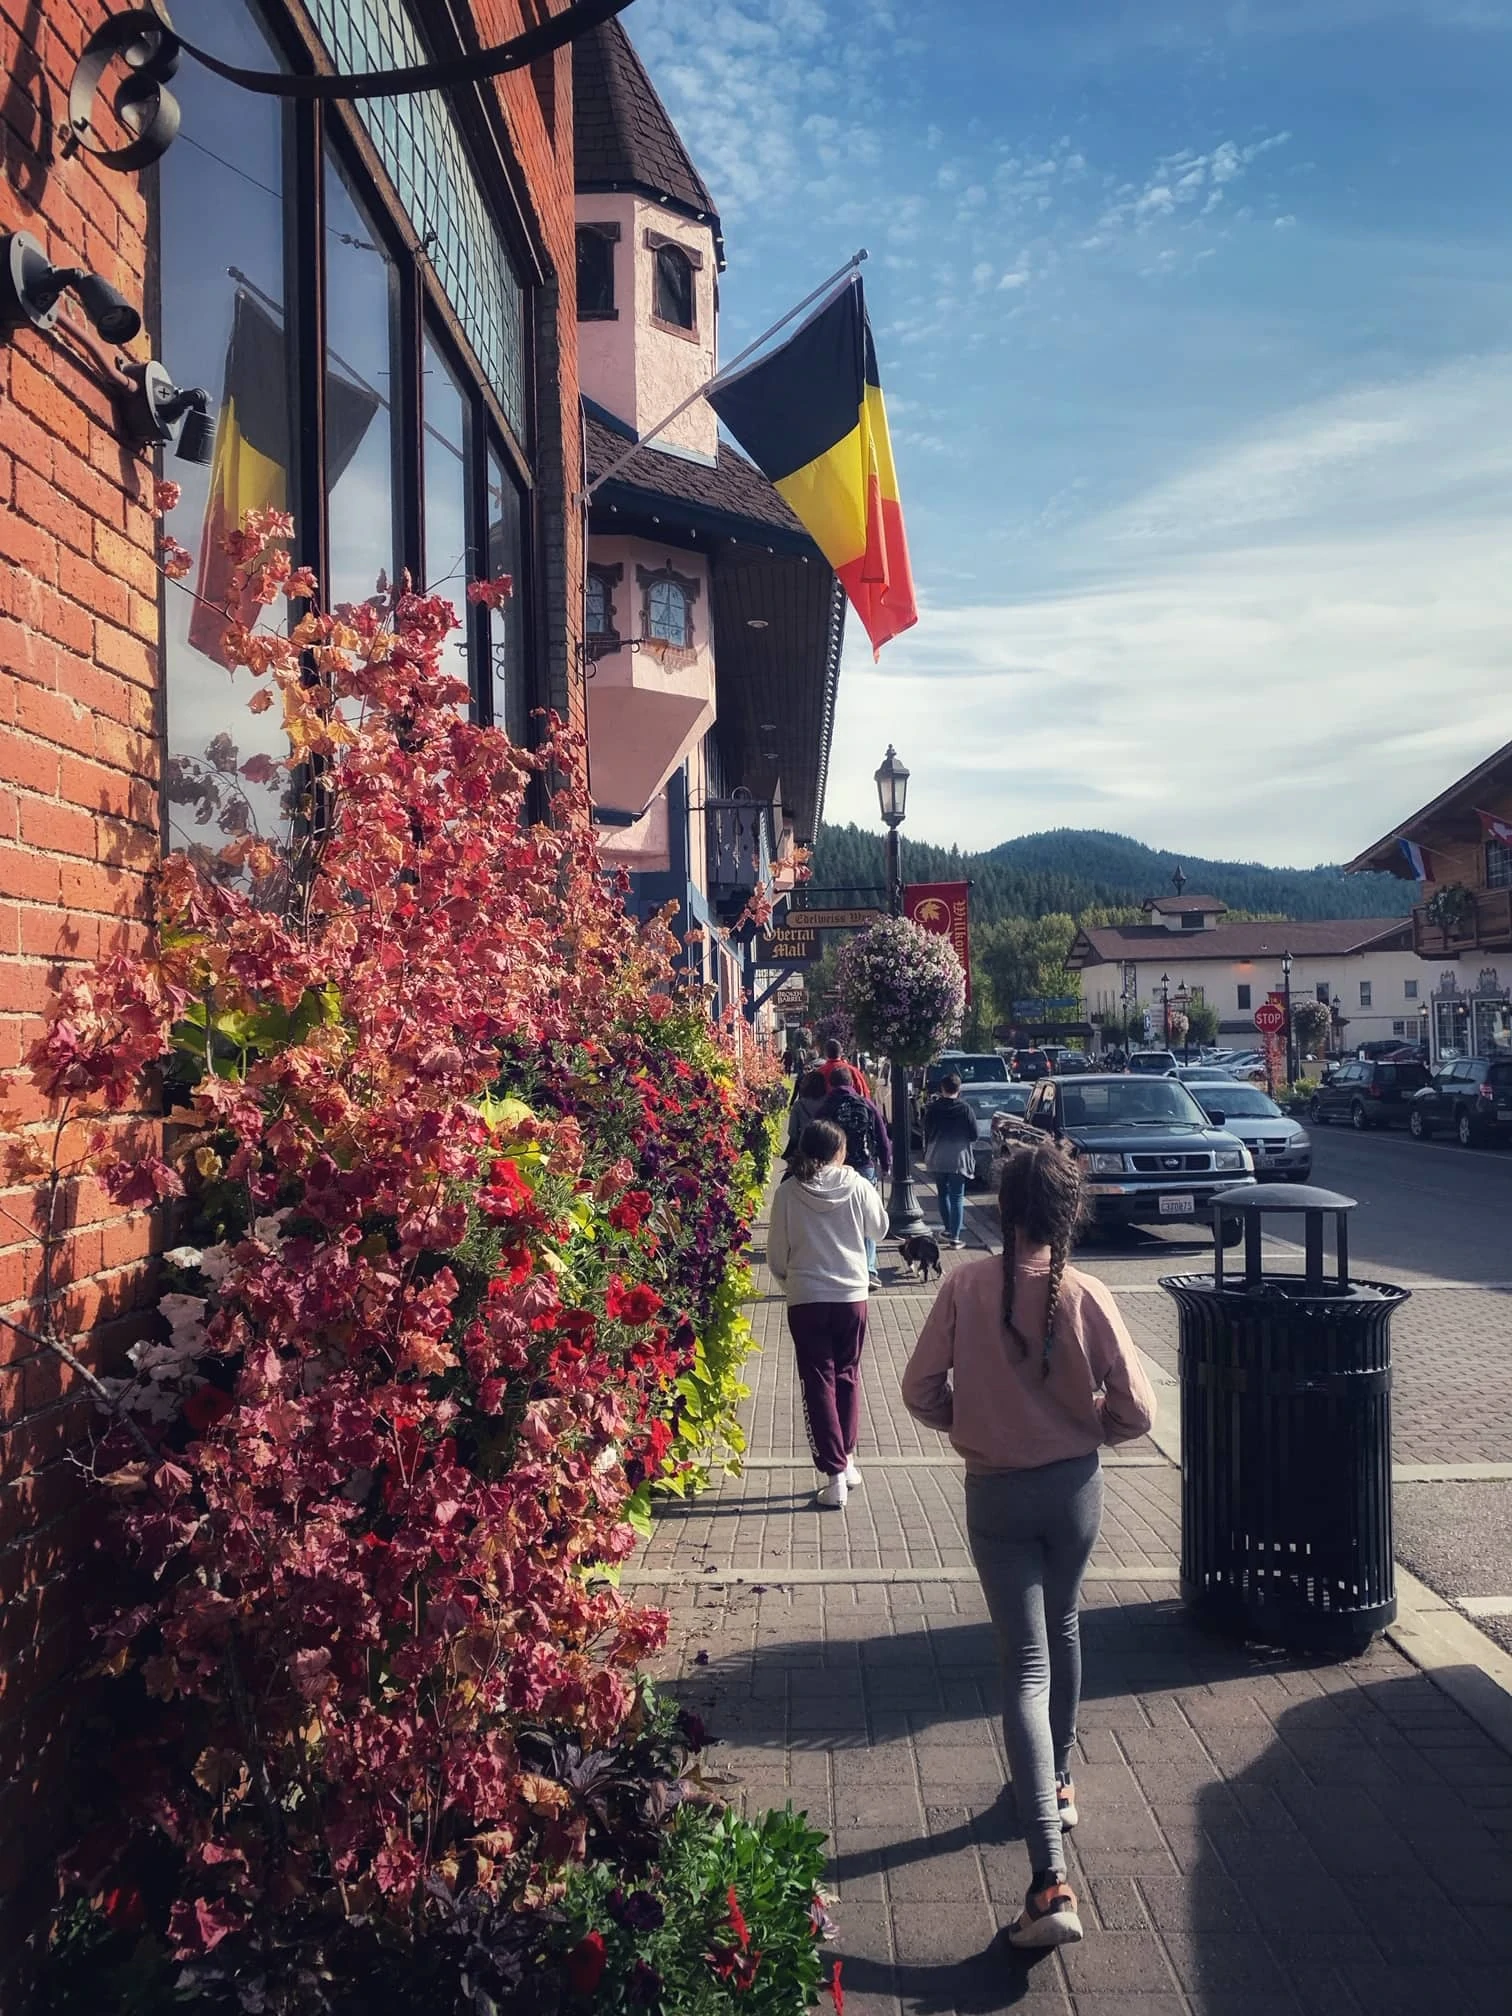 downtown leavenworth in the fall